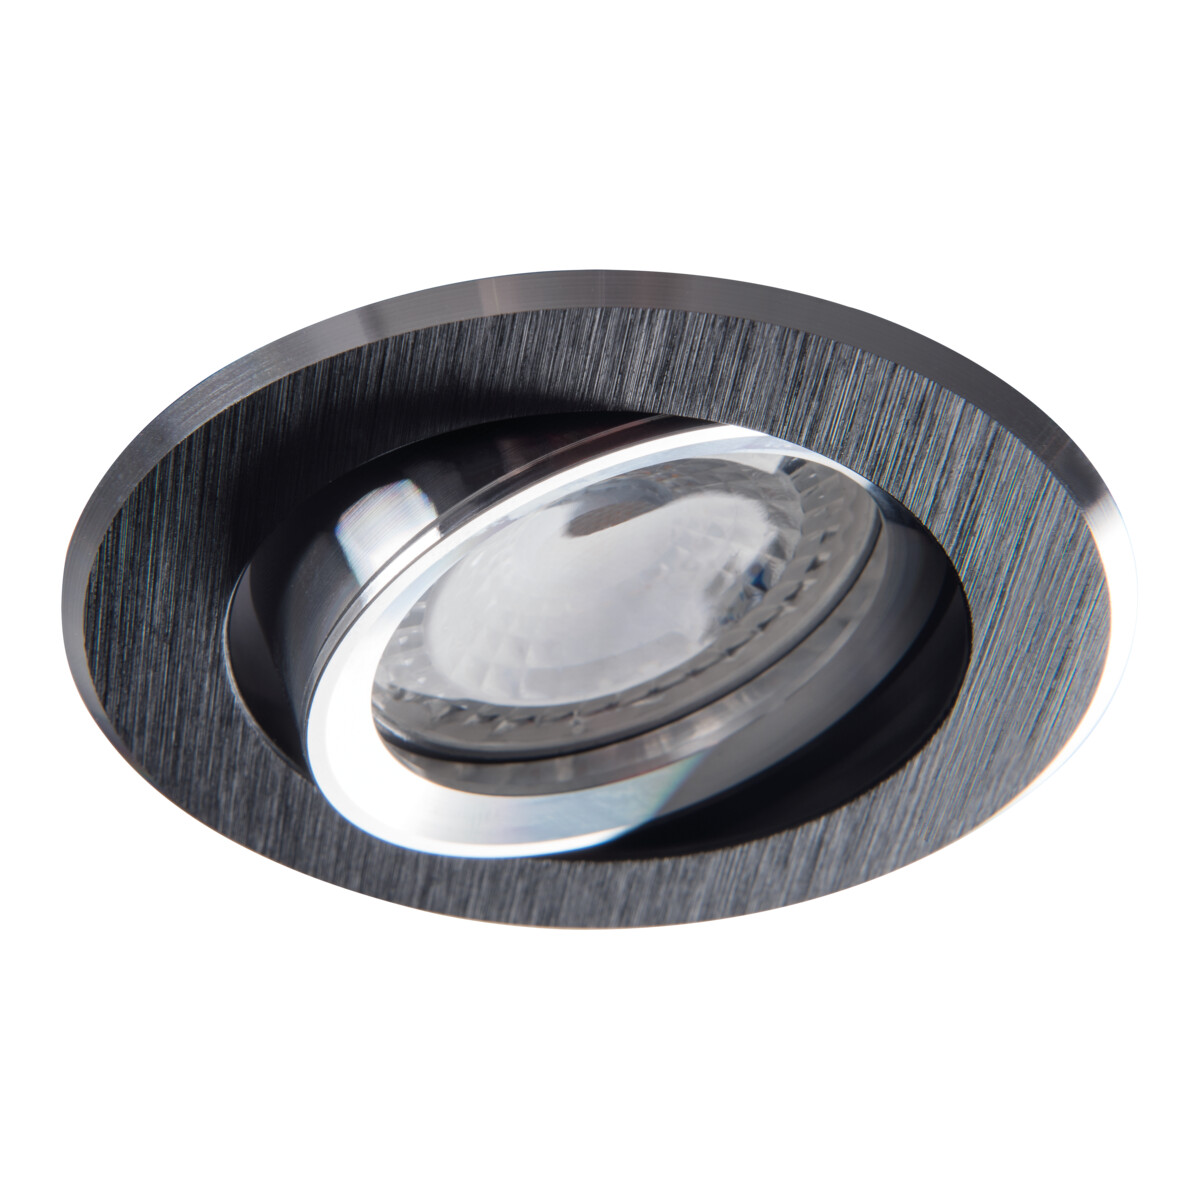 Ceiling-mounted spotlight fitting GWEN CT-DTO50-B - Kanlux